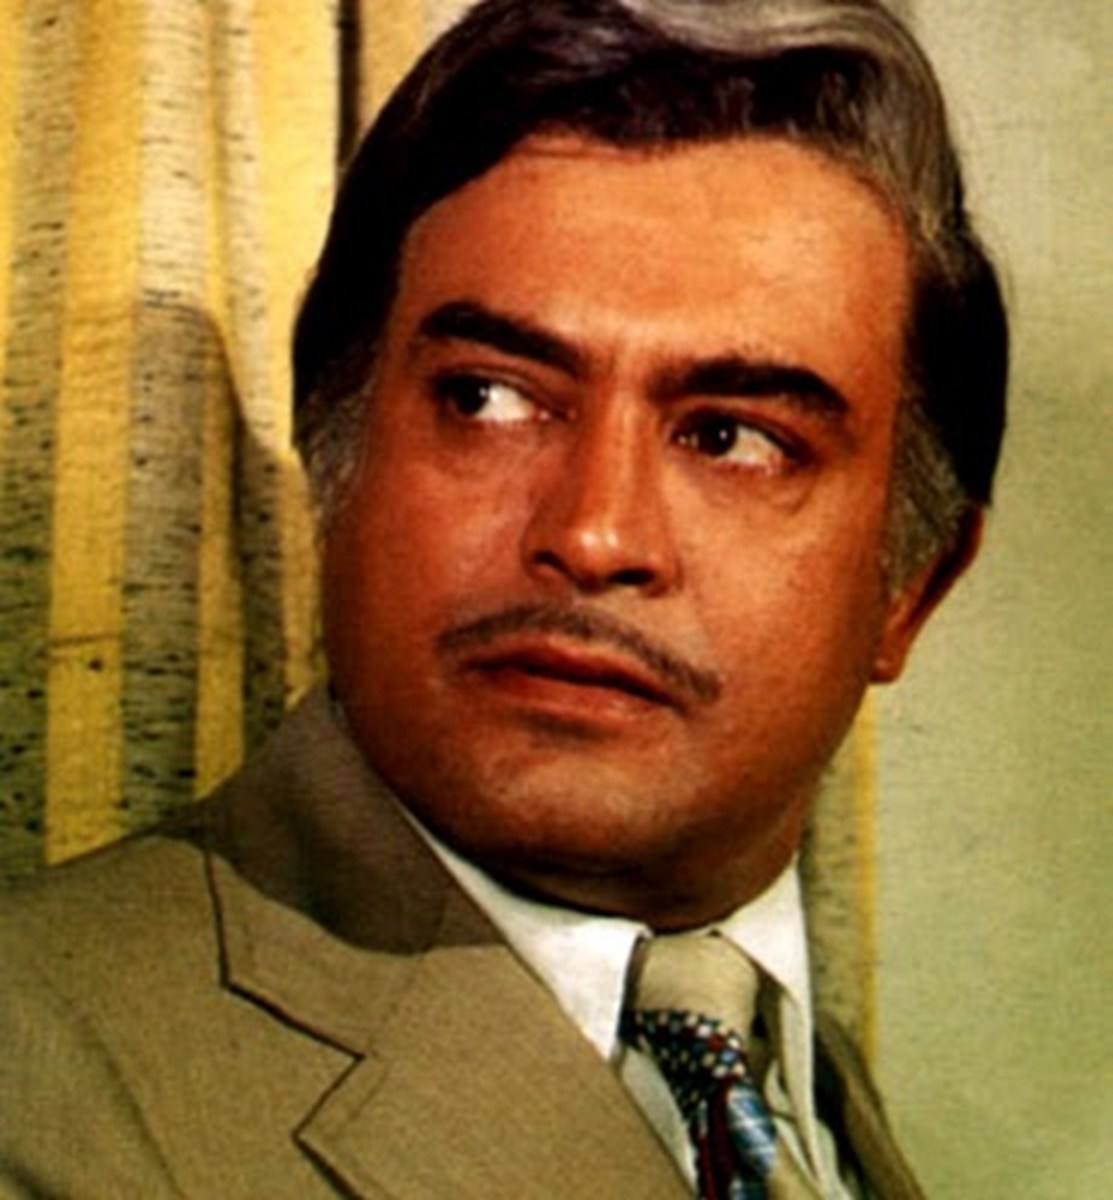 Sanjeev Kumar was one of the greatest actors to have graced the silver screen. With over 100 iconic movies in a short life of 47 years, the actor-par-excellence memorable performances remain unparalleled in the annals of world cinema.